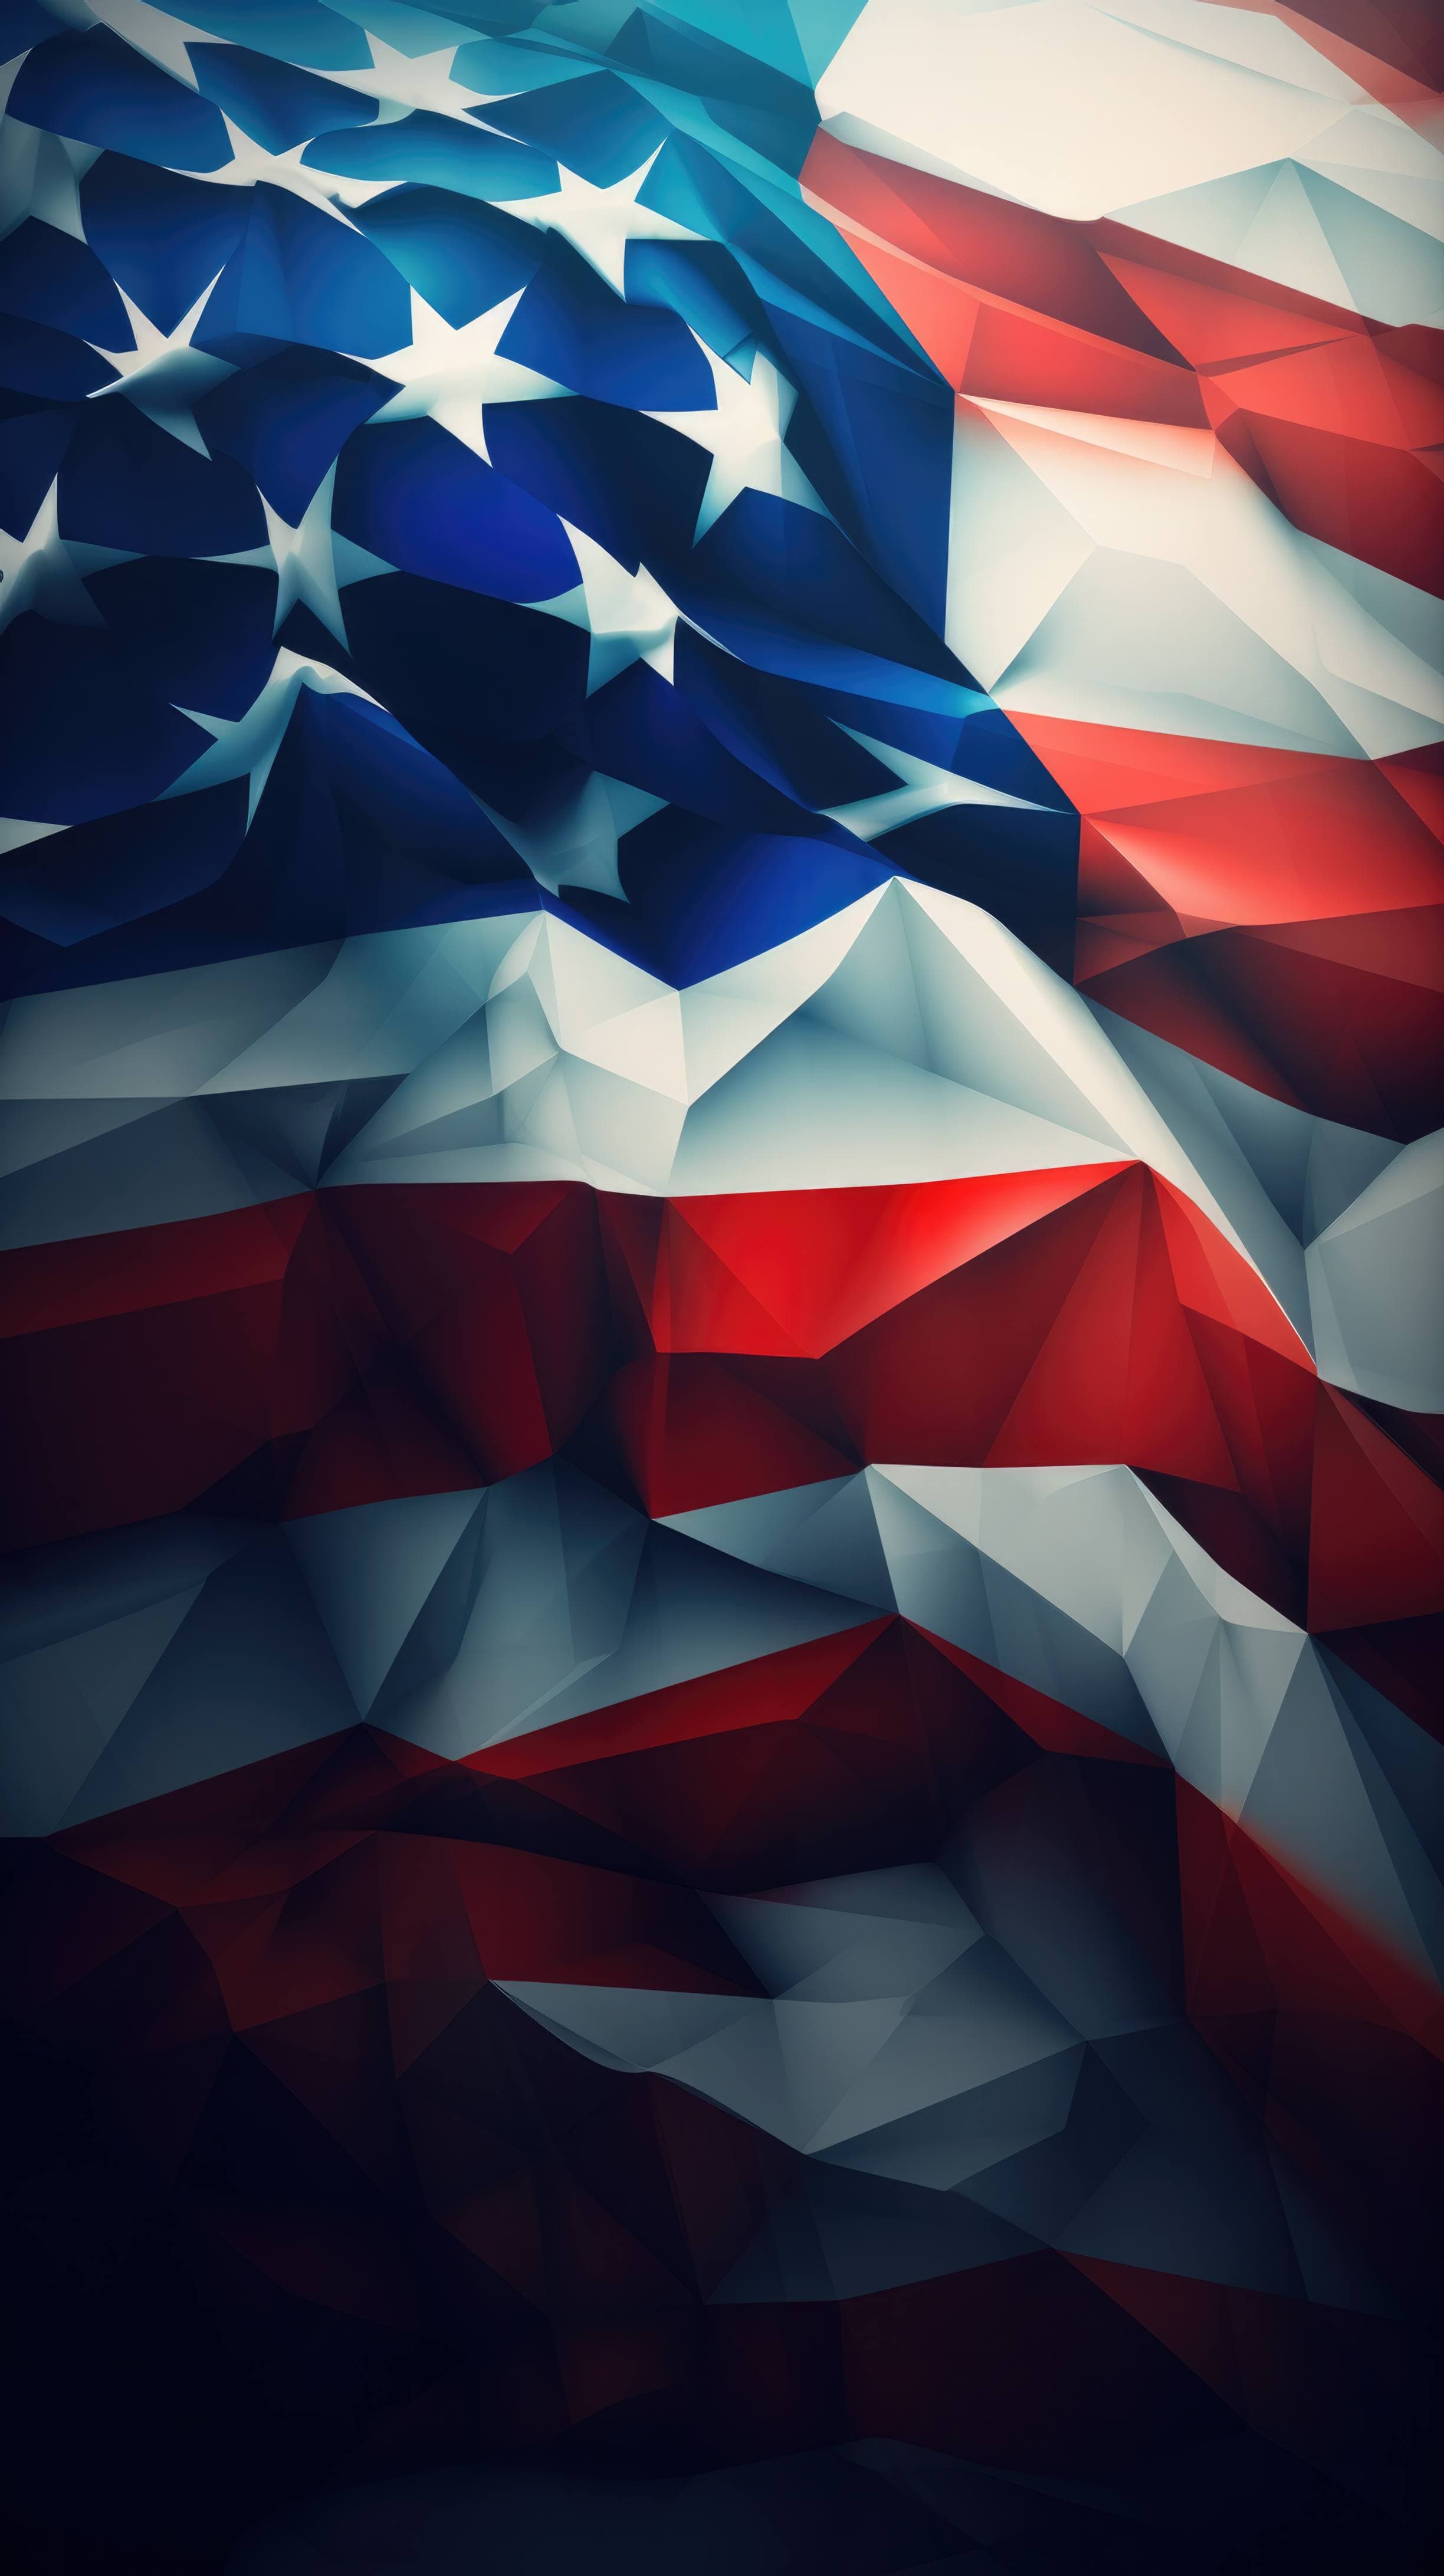 Download wallpapers 1242x2208 usa flag, 4th of july, independence day, national flag, usa, abstract, polygonal, usa flag, independence day 2019, usa flag backgrounds for desktop and mobile devices in high resolution - Low poly